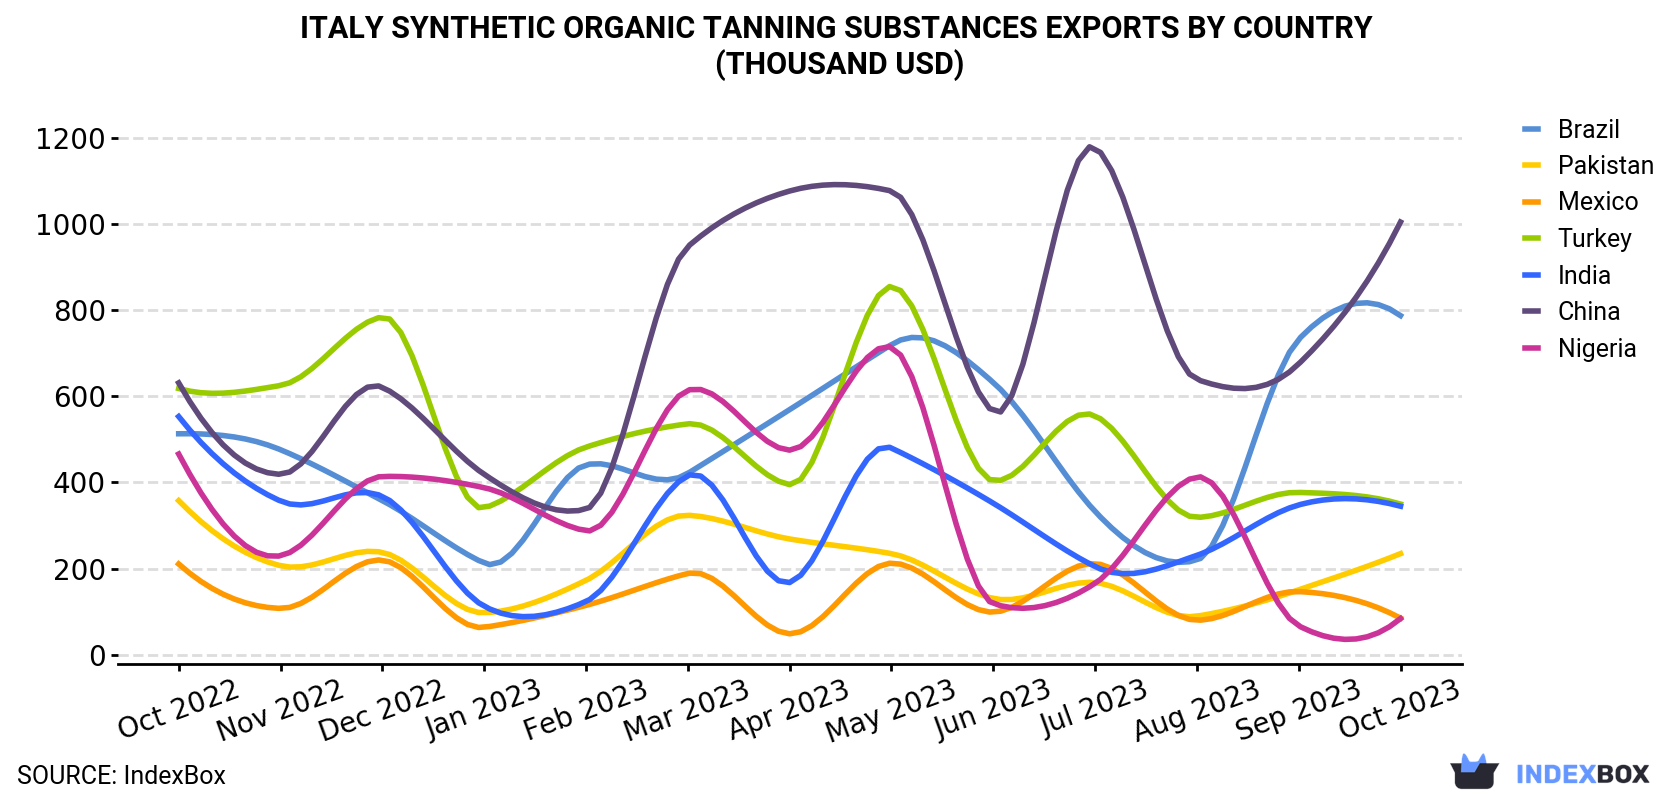 Italy Synthetic Organic Tanning Substances Exports By Country (Thousand USD)